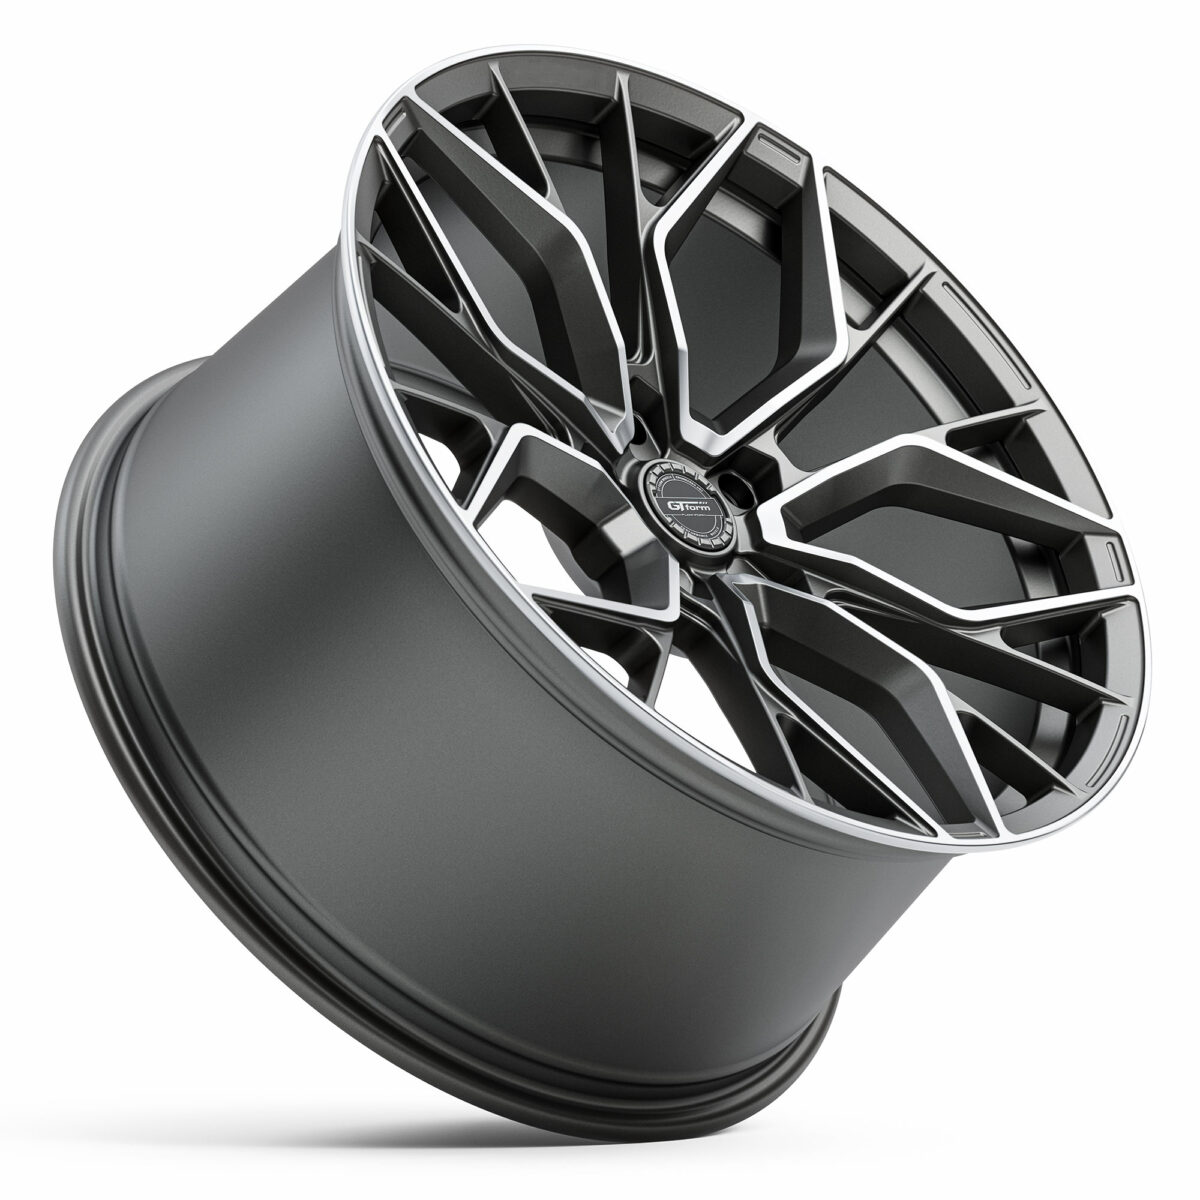 GT Form Marquee Satin Gunmetal Machined Face Staggered Rims 19 inch Performance Wheels